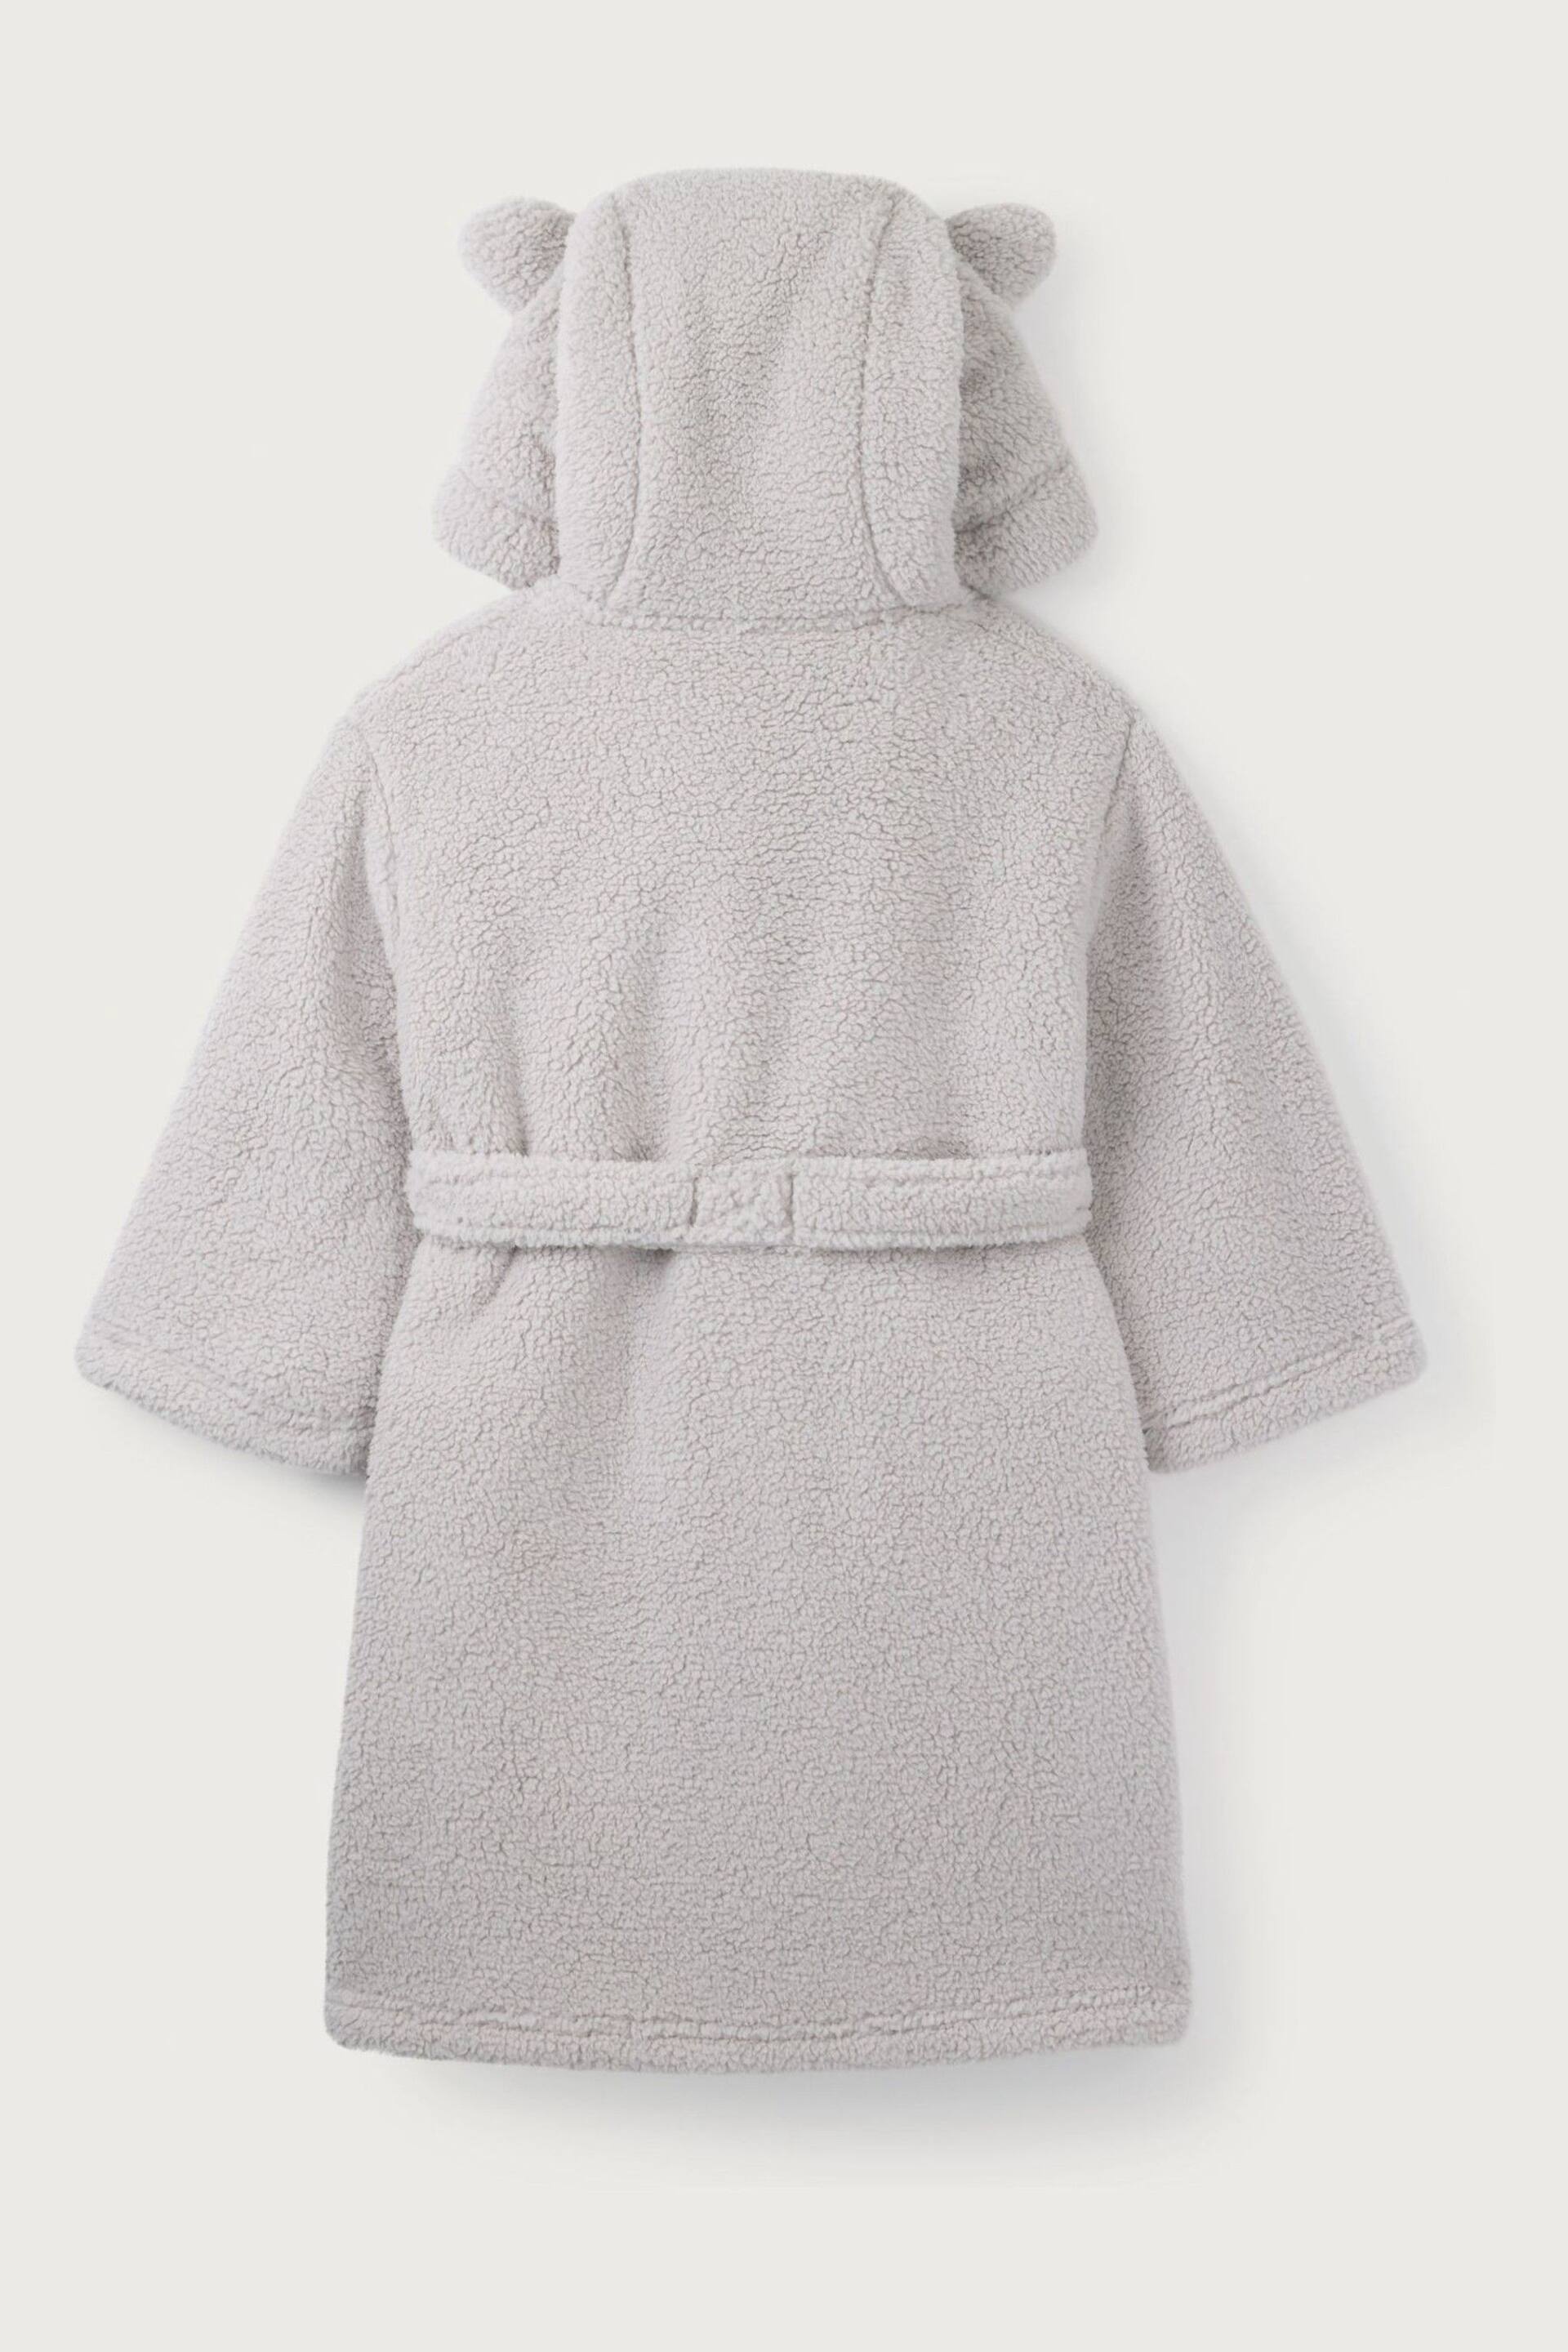 The White Company Grey Teddy Snuggle Robe - Image 2 of 2